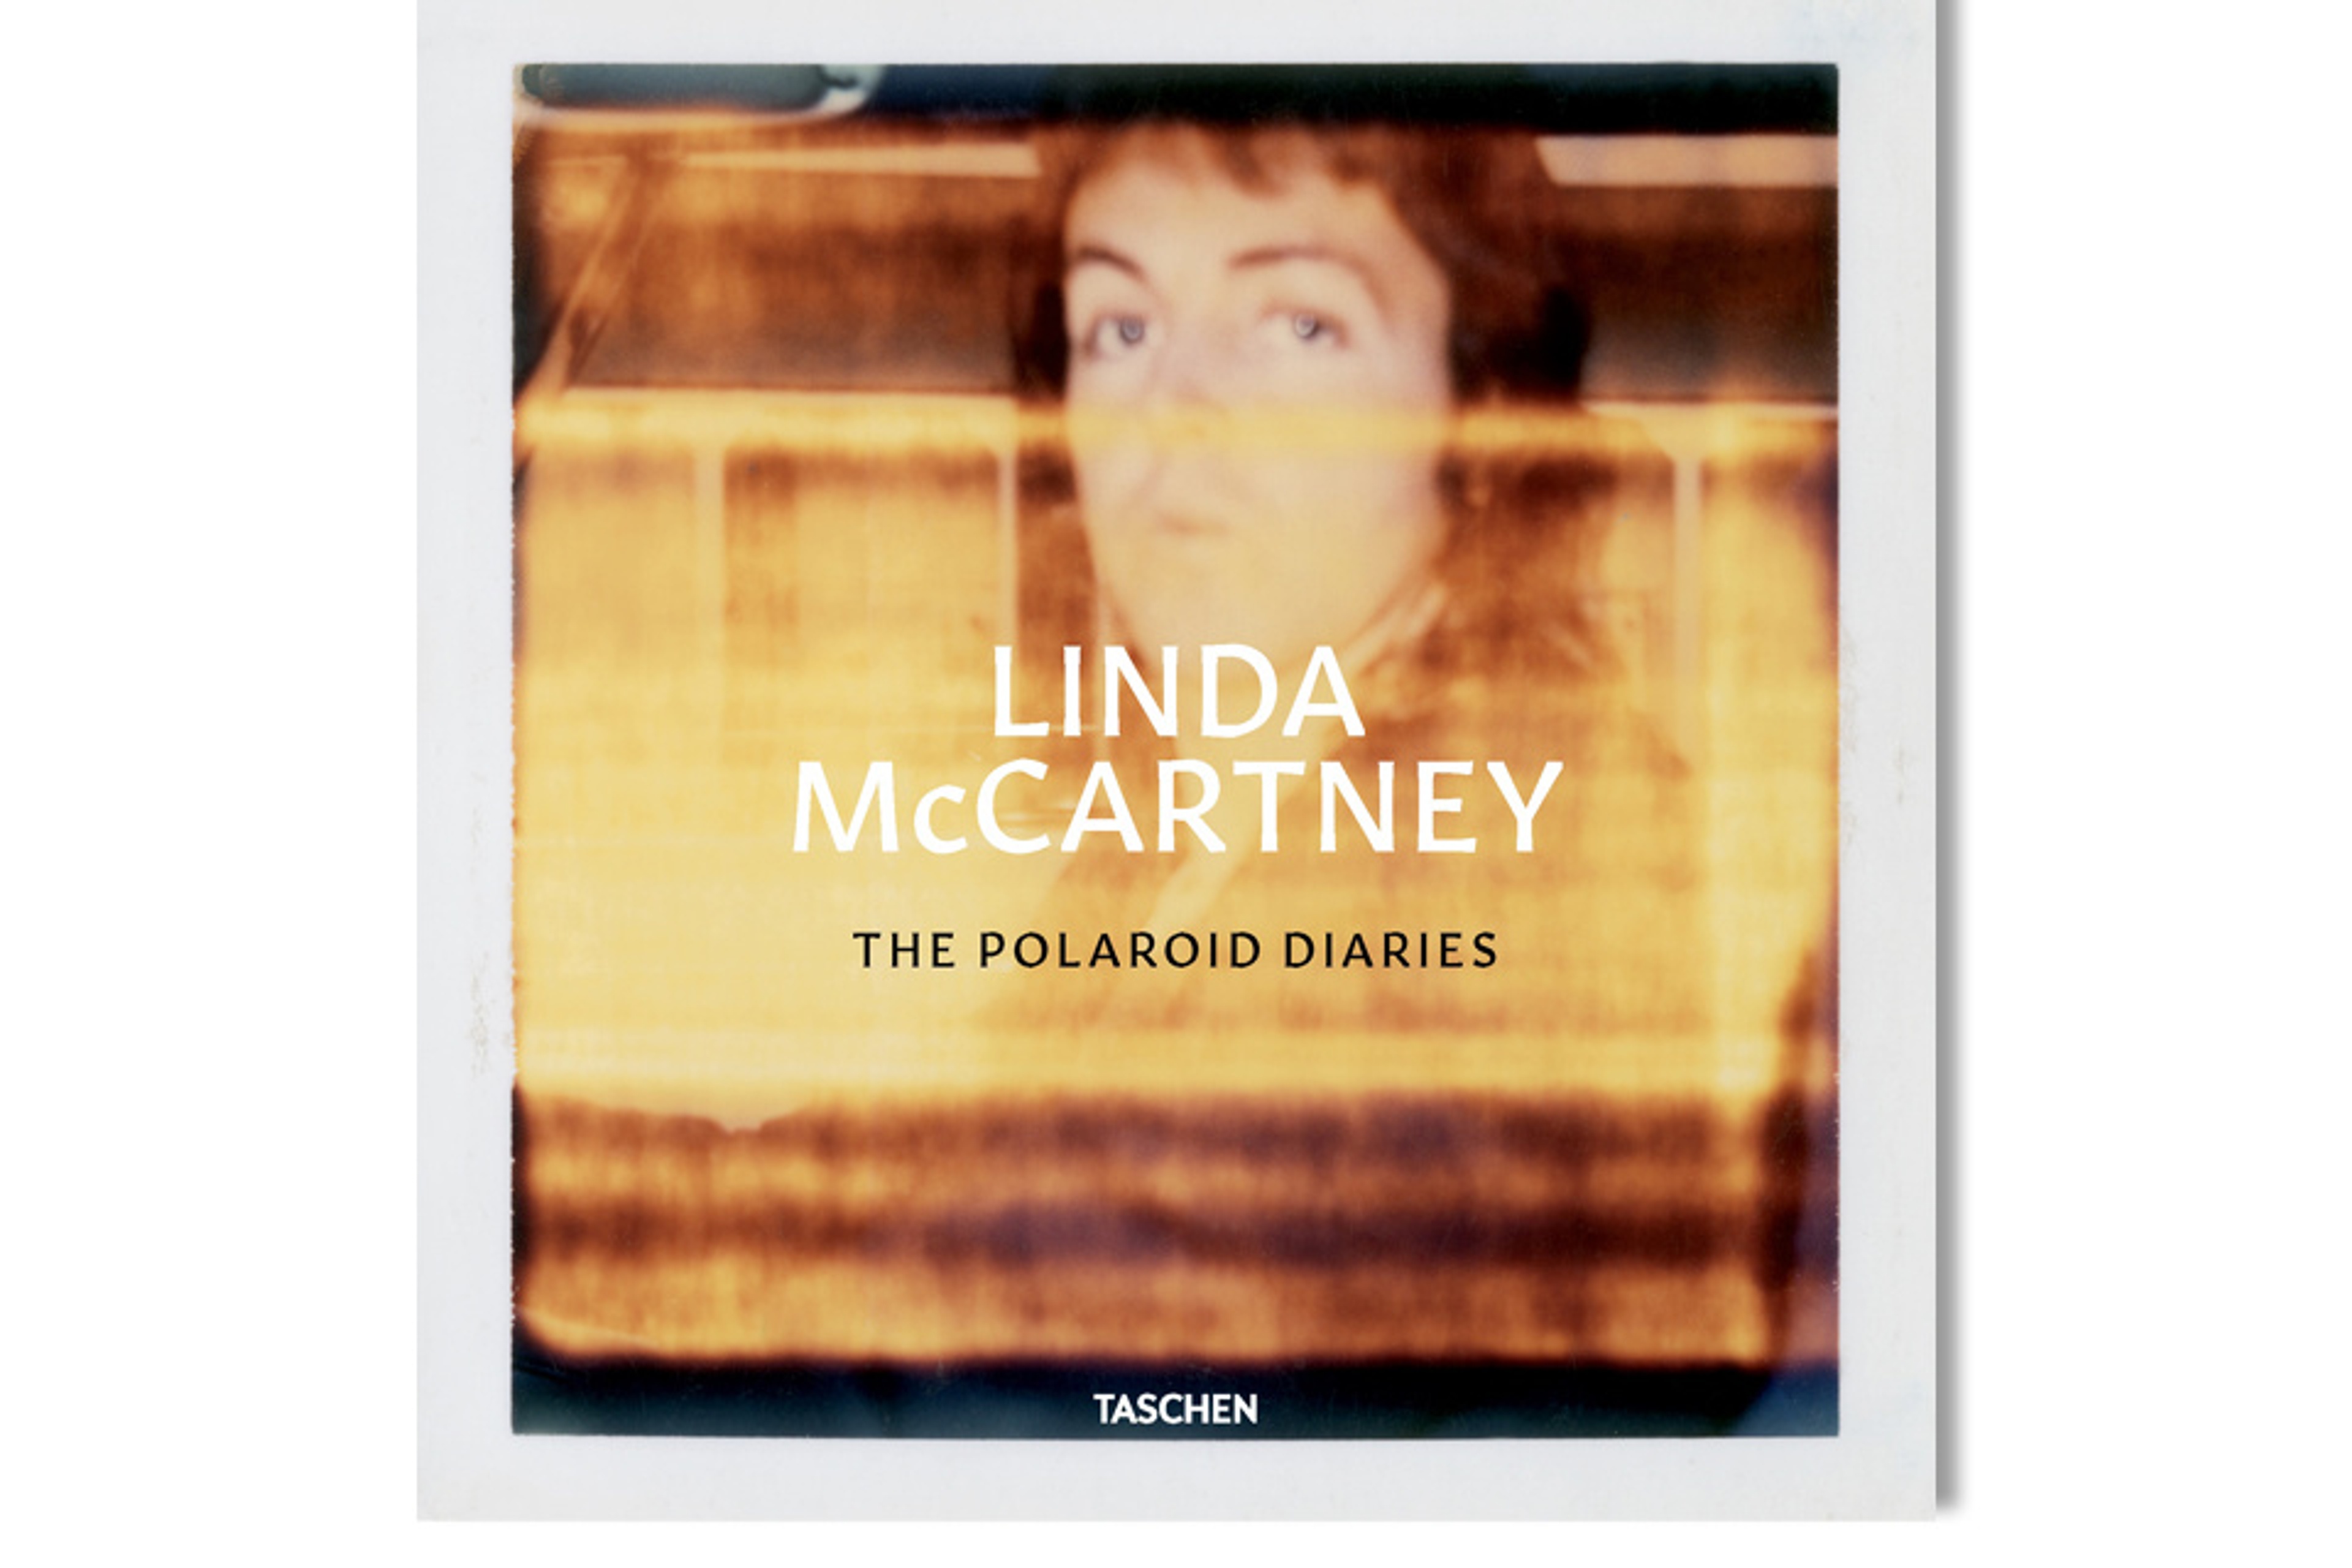 Image of the 'Linda McCartney: The Polaroid Diaries' book cover